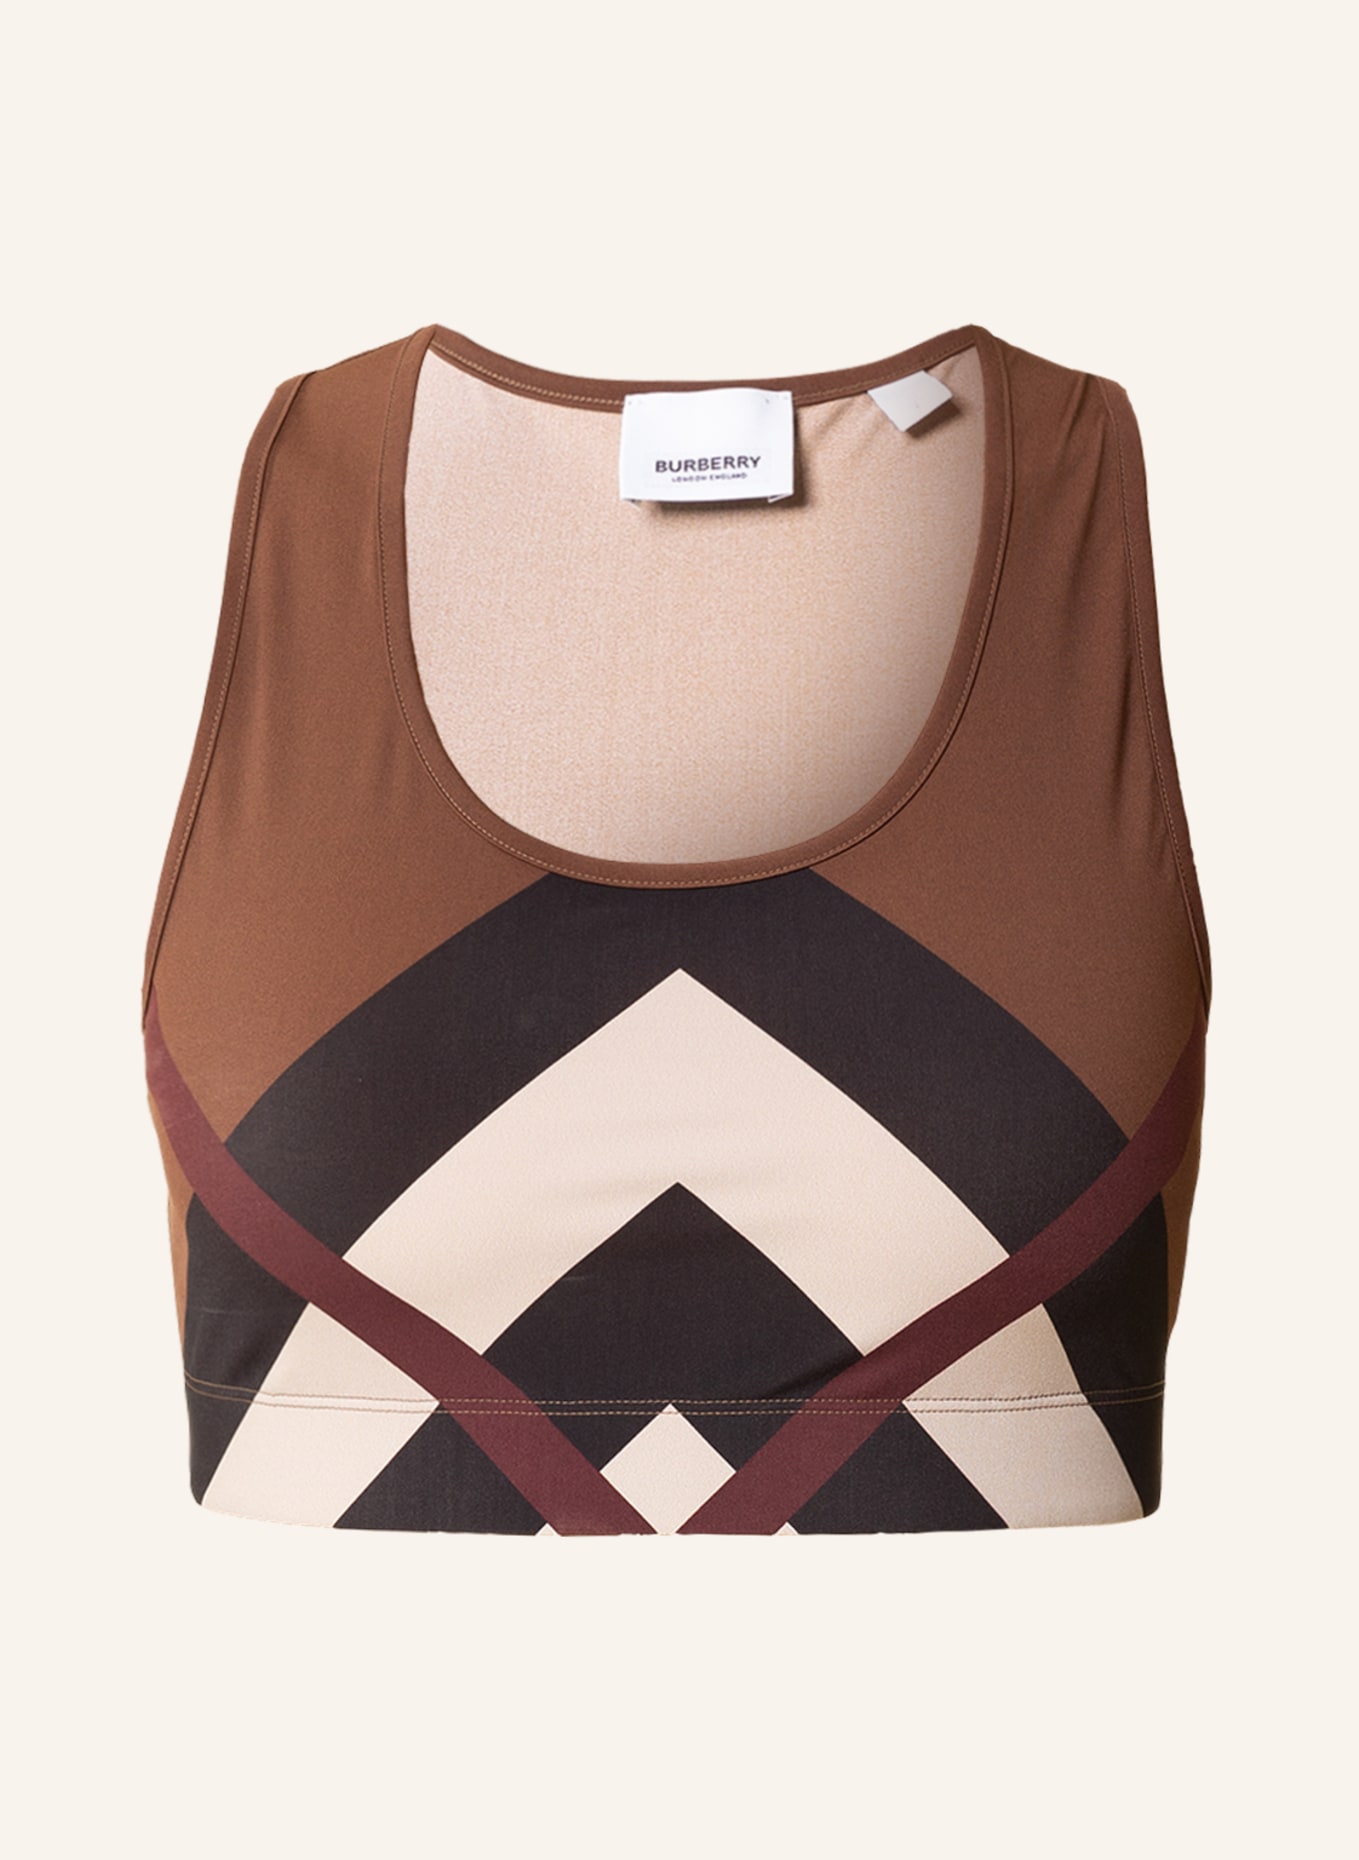 BURBERRY Cropped top IMMY, Color: BROWN/ LIGHT BROWN/ DARK RED (Image 1)